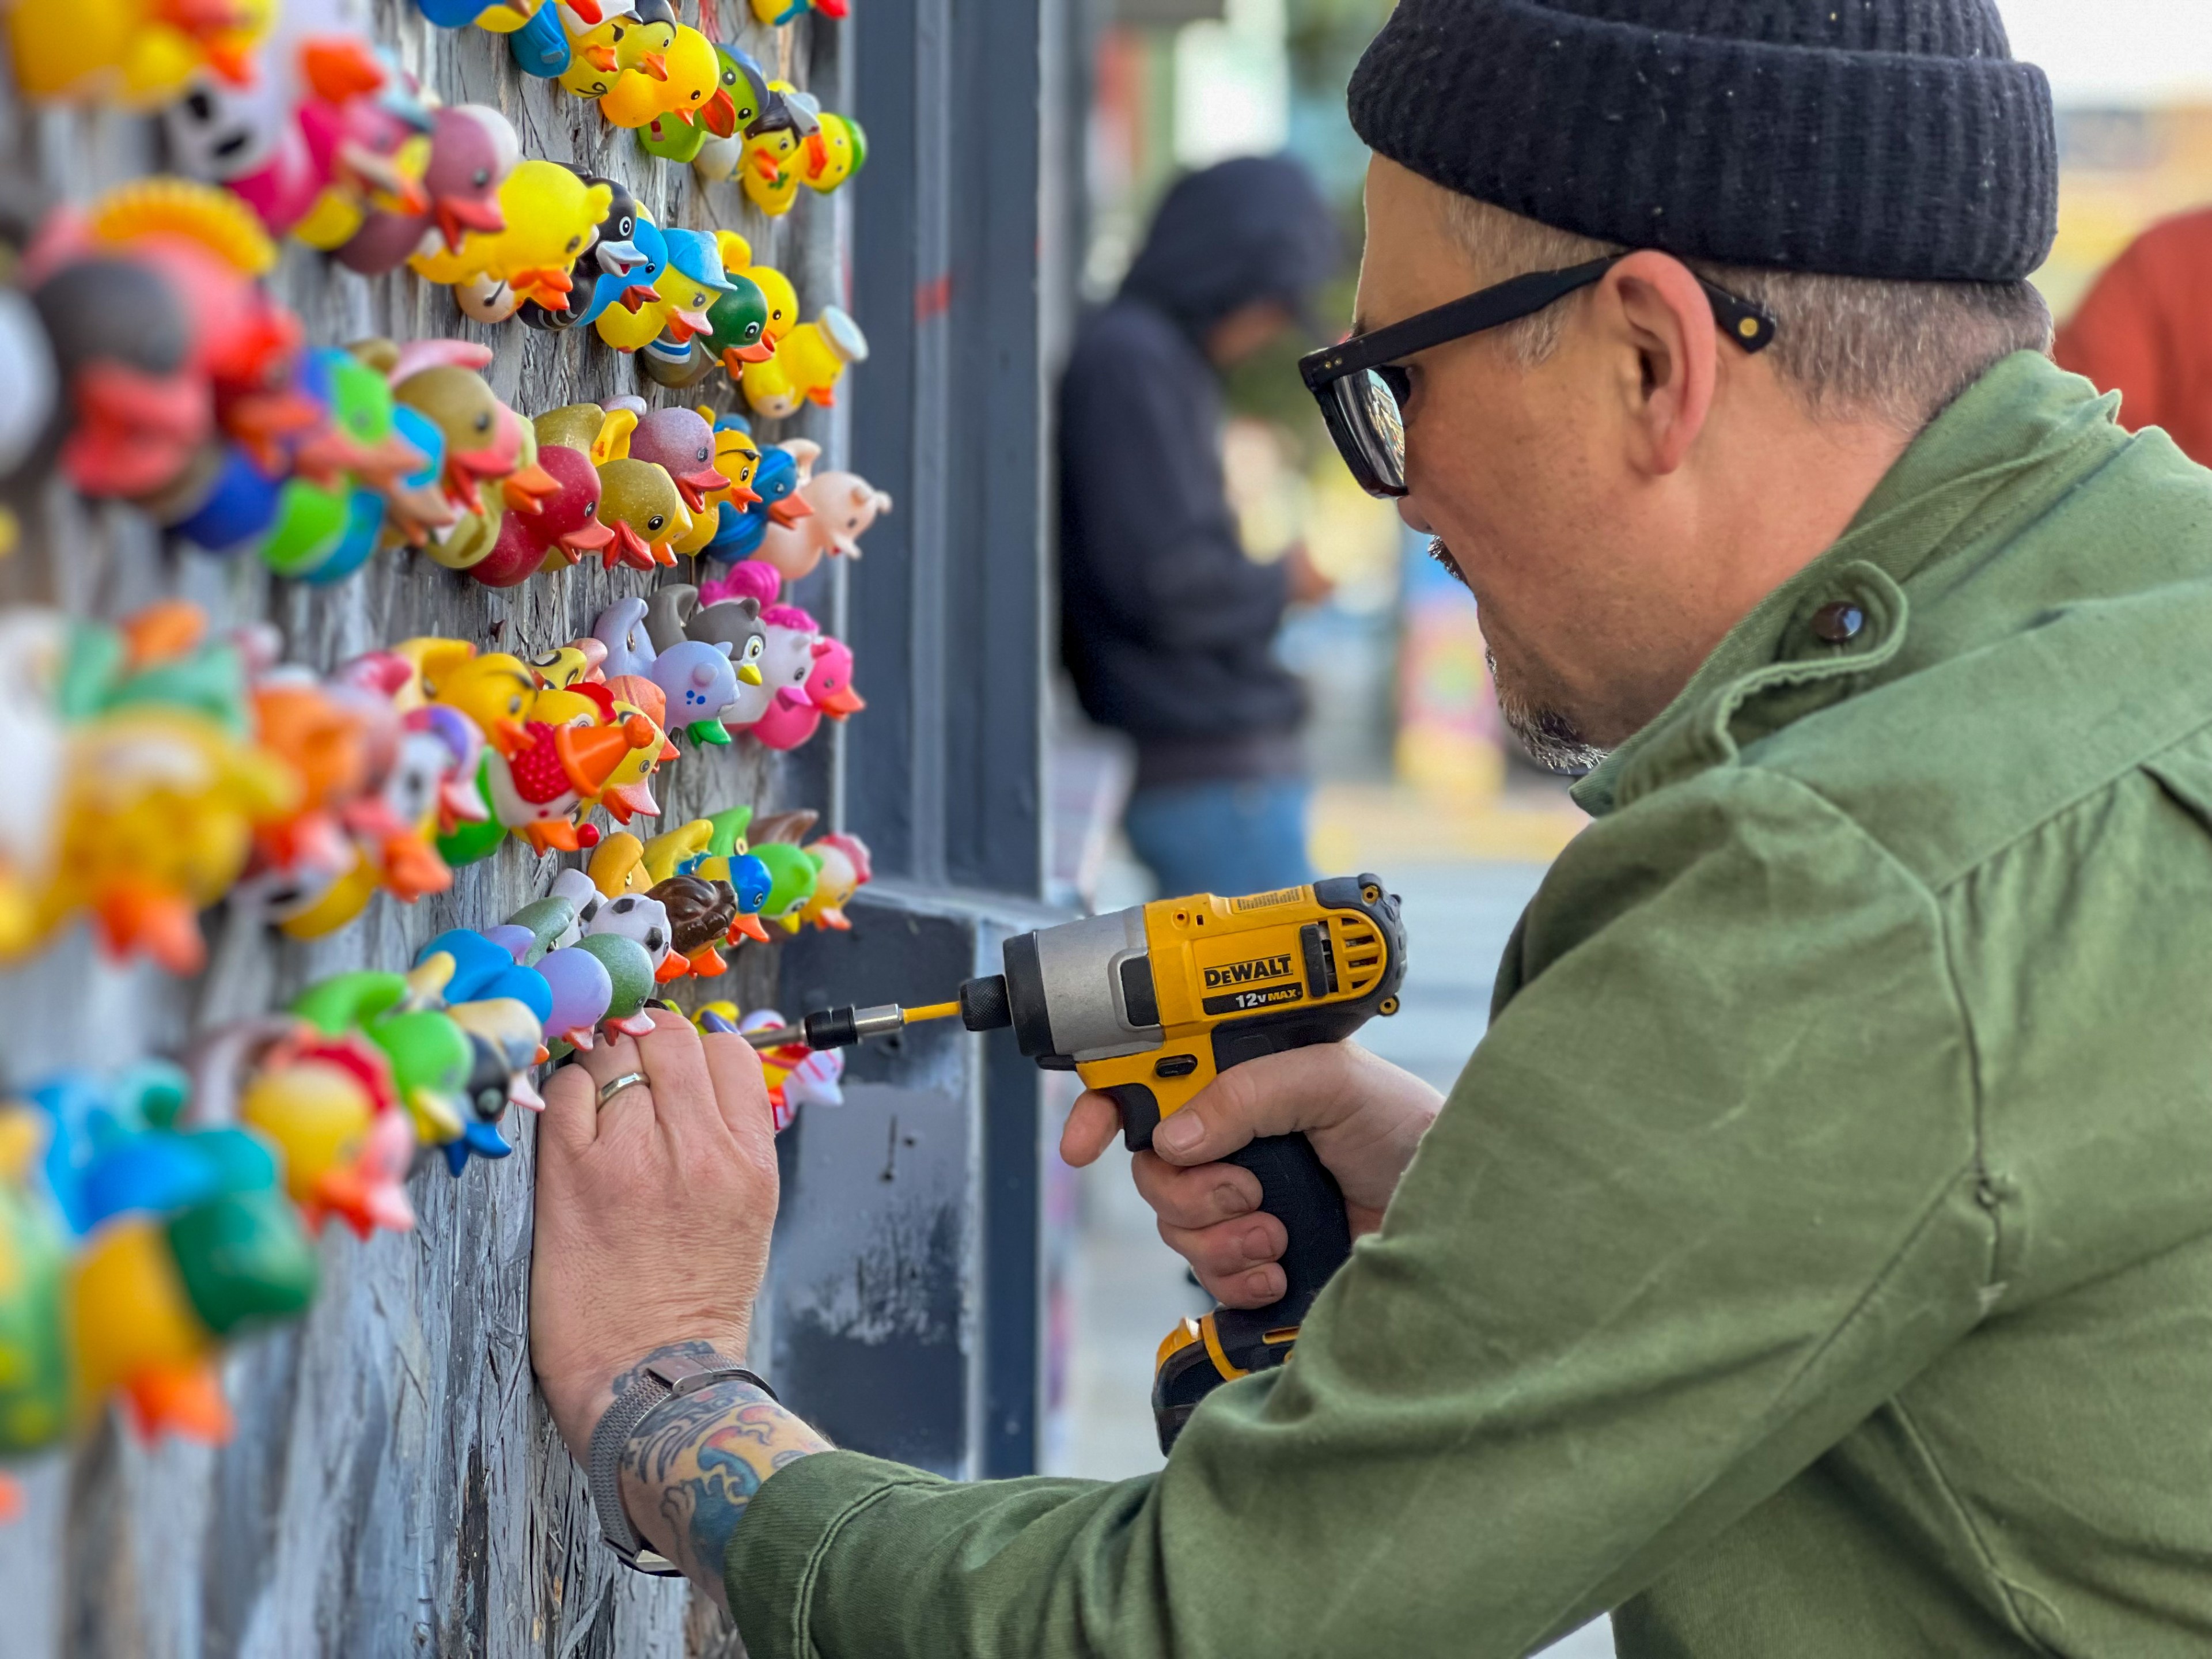 a man in a green shirt and black cap drills a duck into a wall of rubber ducks